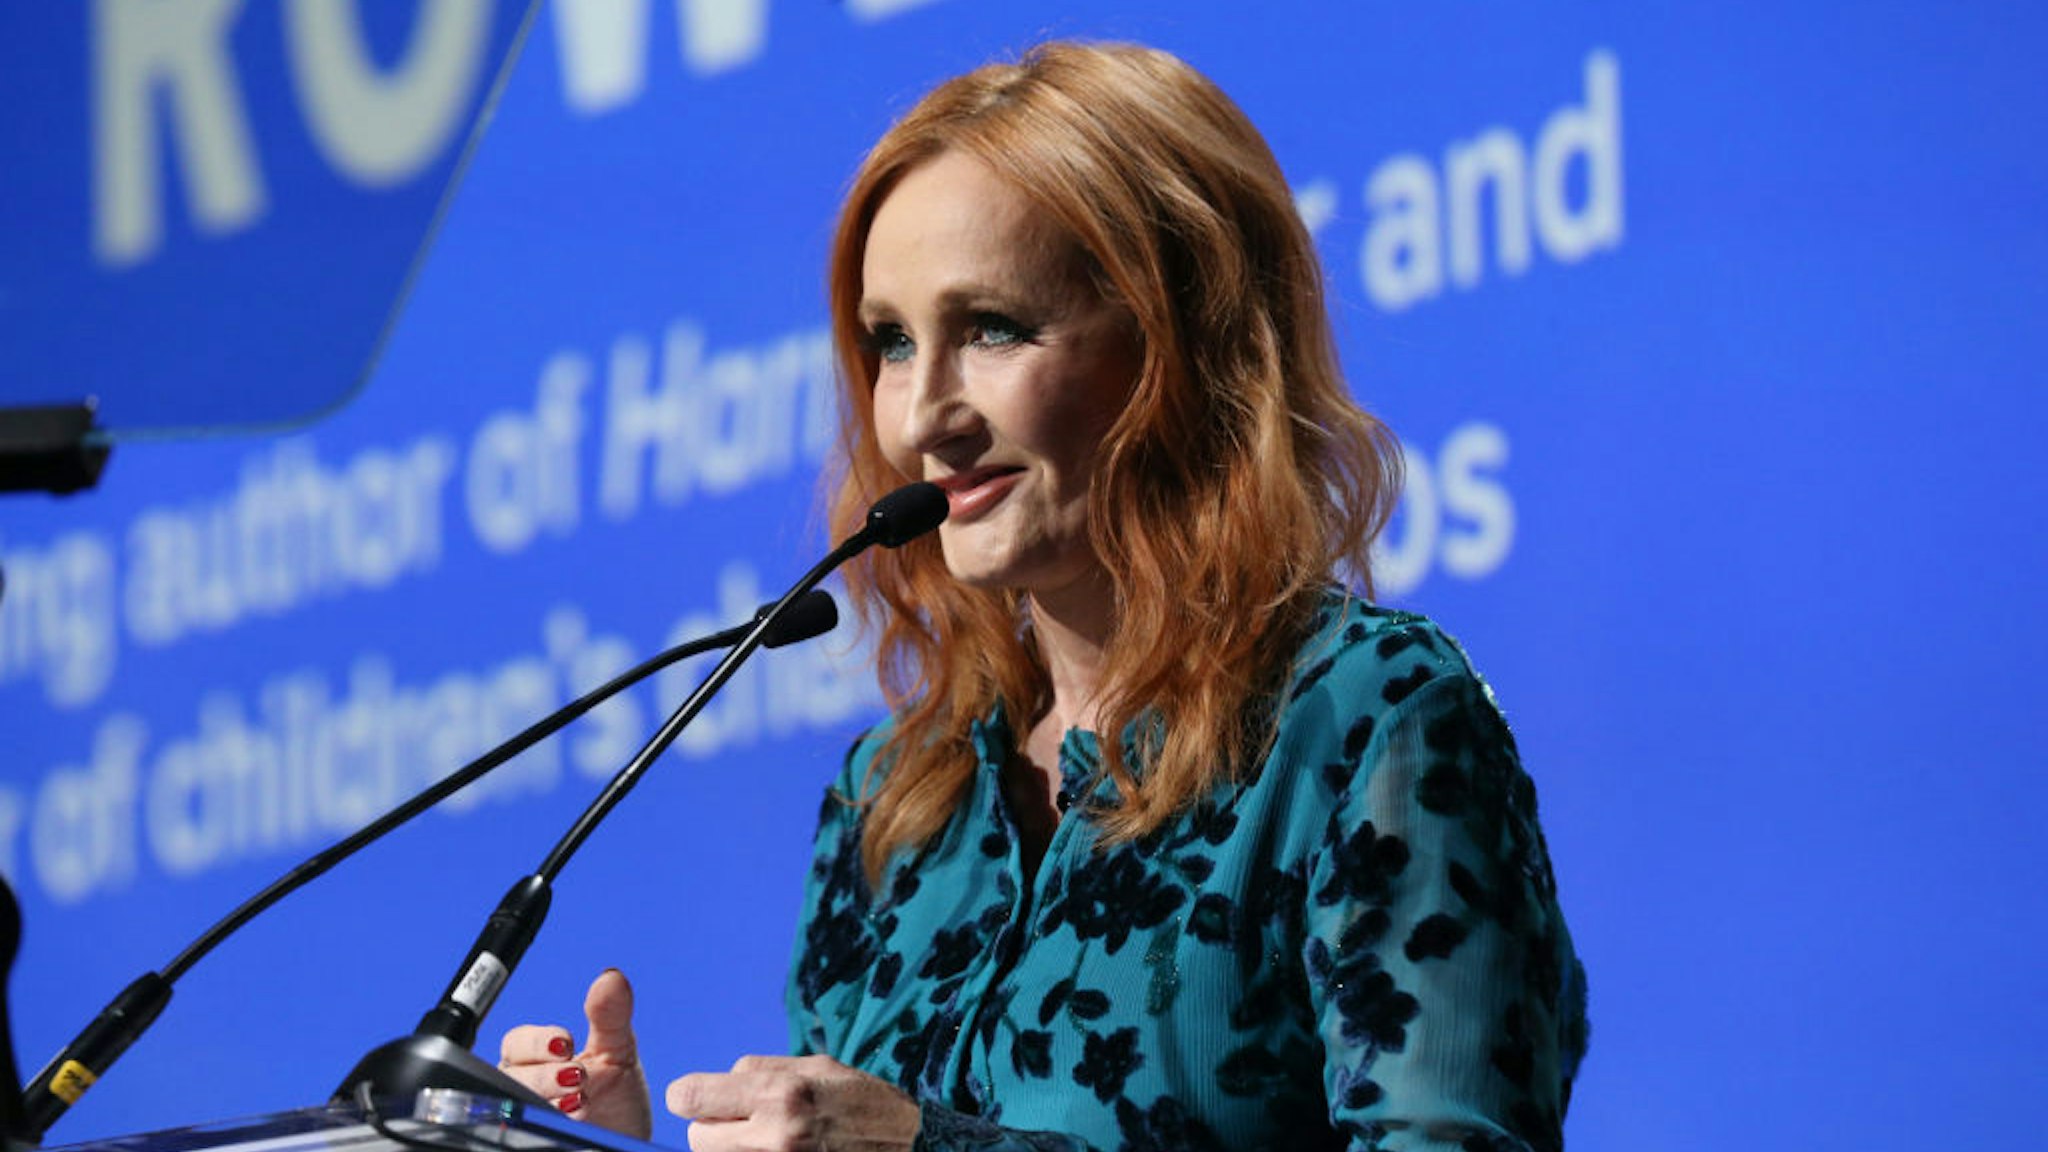 NEW YORK, NEW YORK - DECEMBER 12: J.K. Rowling accepts an award onstage during the Robert F. Kennedy Human Rights Hosts 2019 Ripple Of Hope Gala &amp; Auction In NYC on December 12, 2019 in New York City.